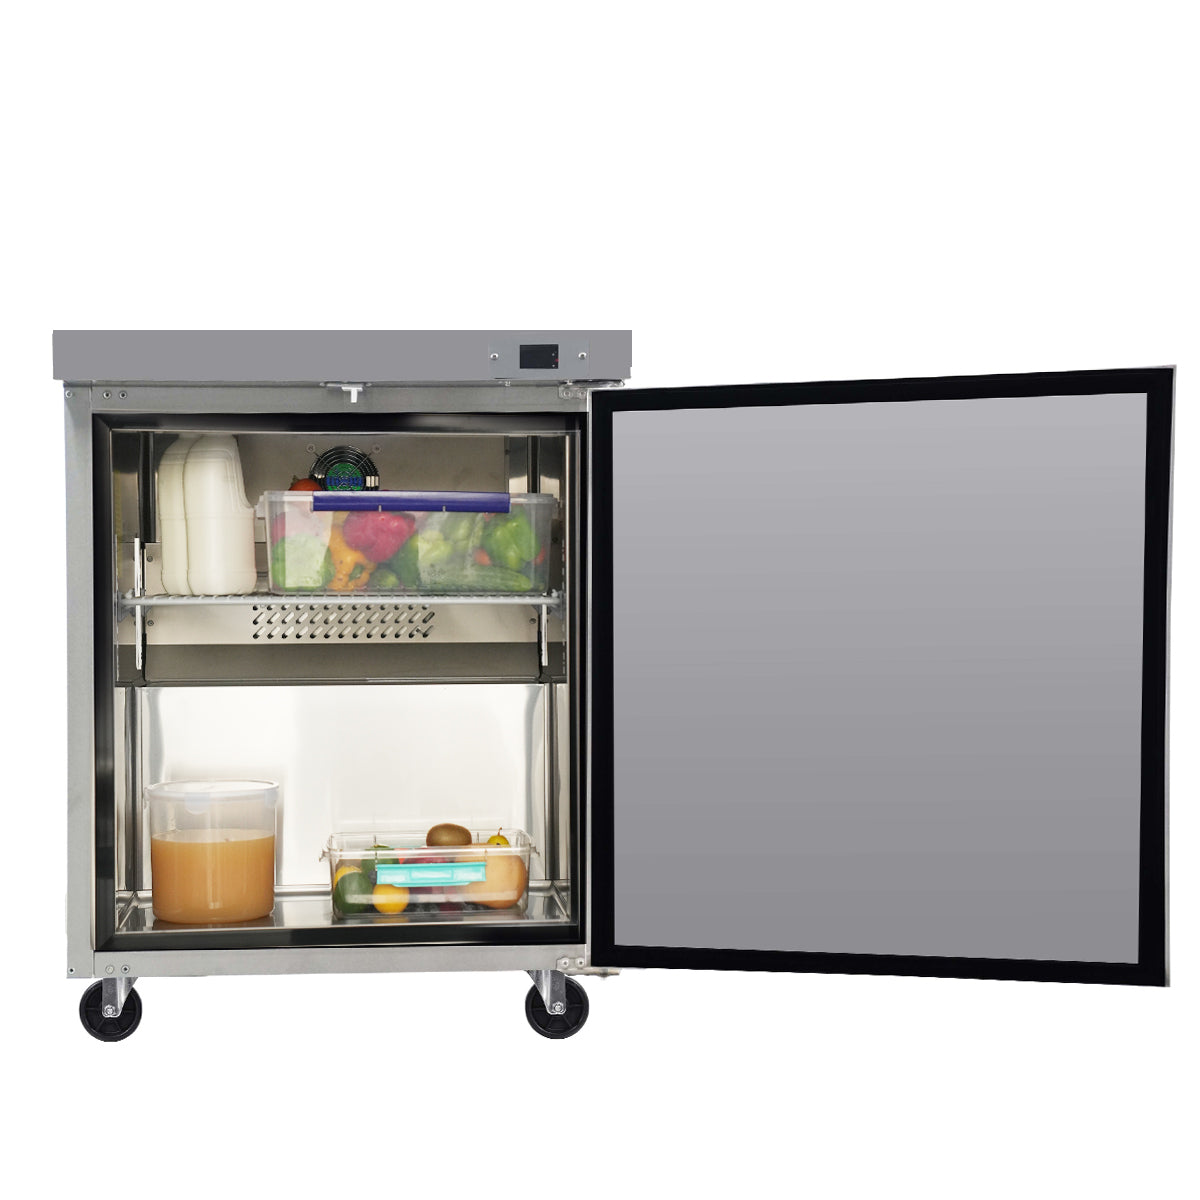 Orikool 29 IN Commercial Refrigerators, Undercounter silver-stainless steel